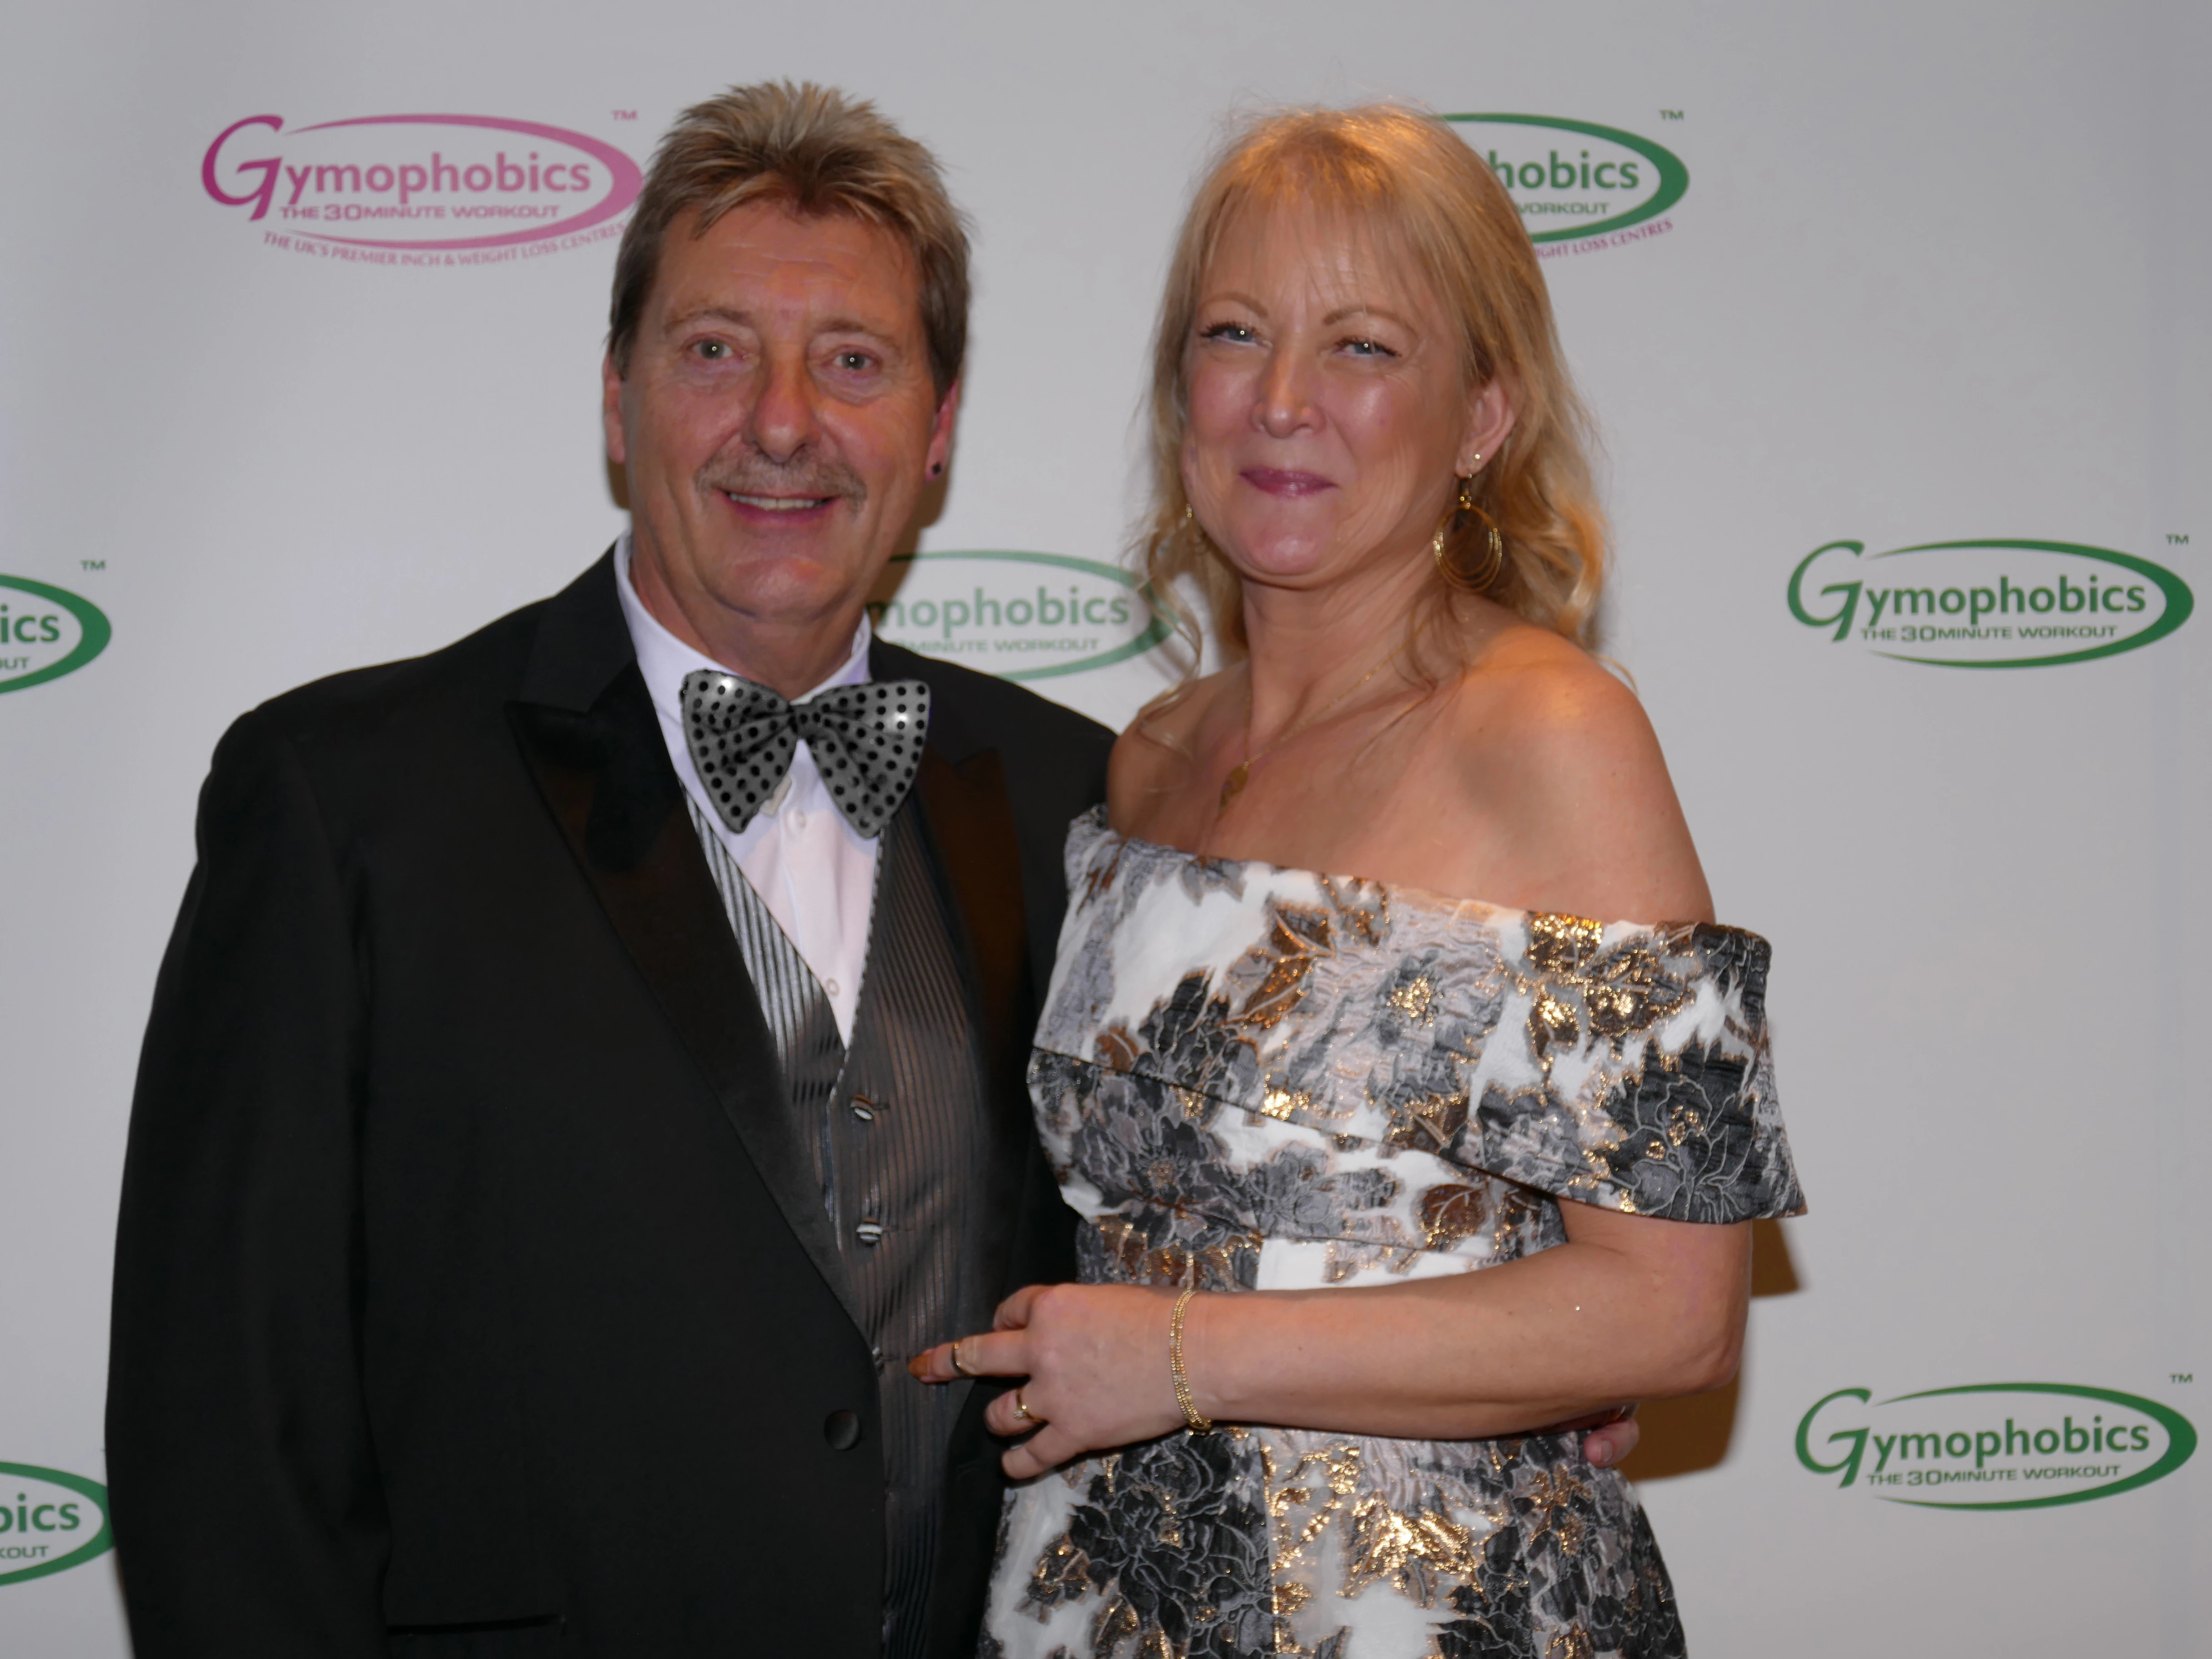 Steve and Sarah Webster, owners of the Gymophobics centres in Hull, Hessle and Beverley